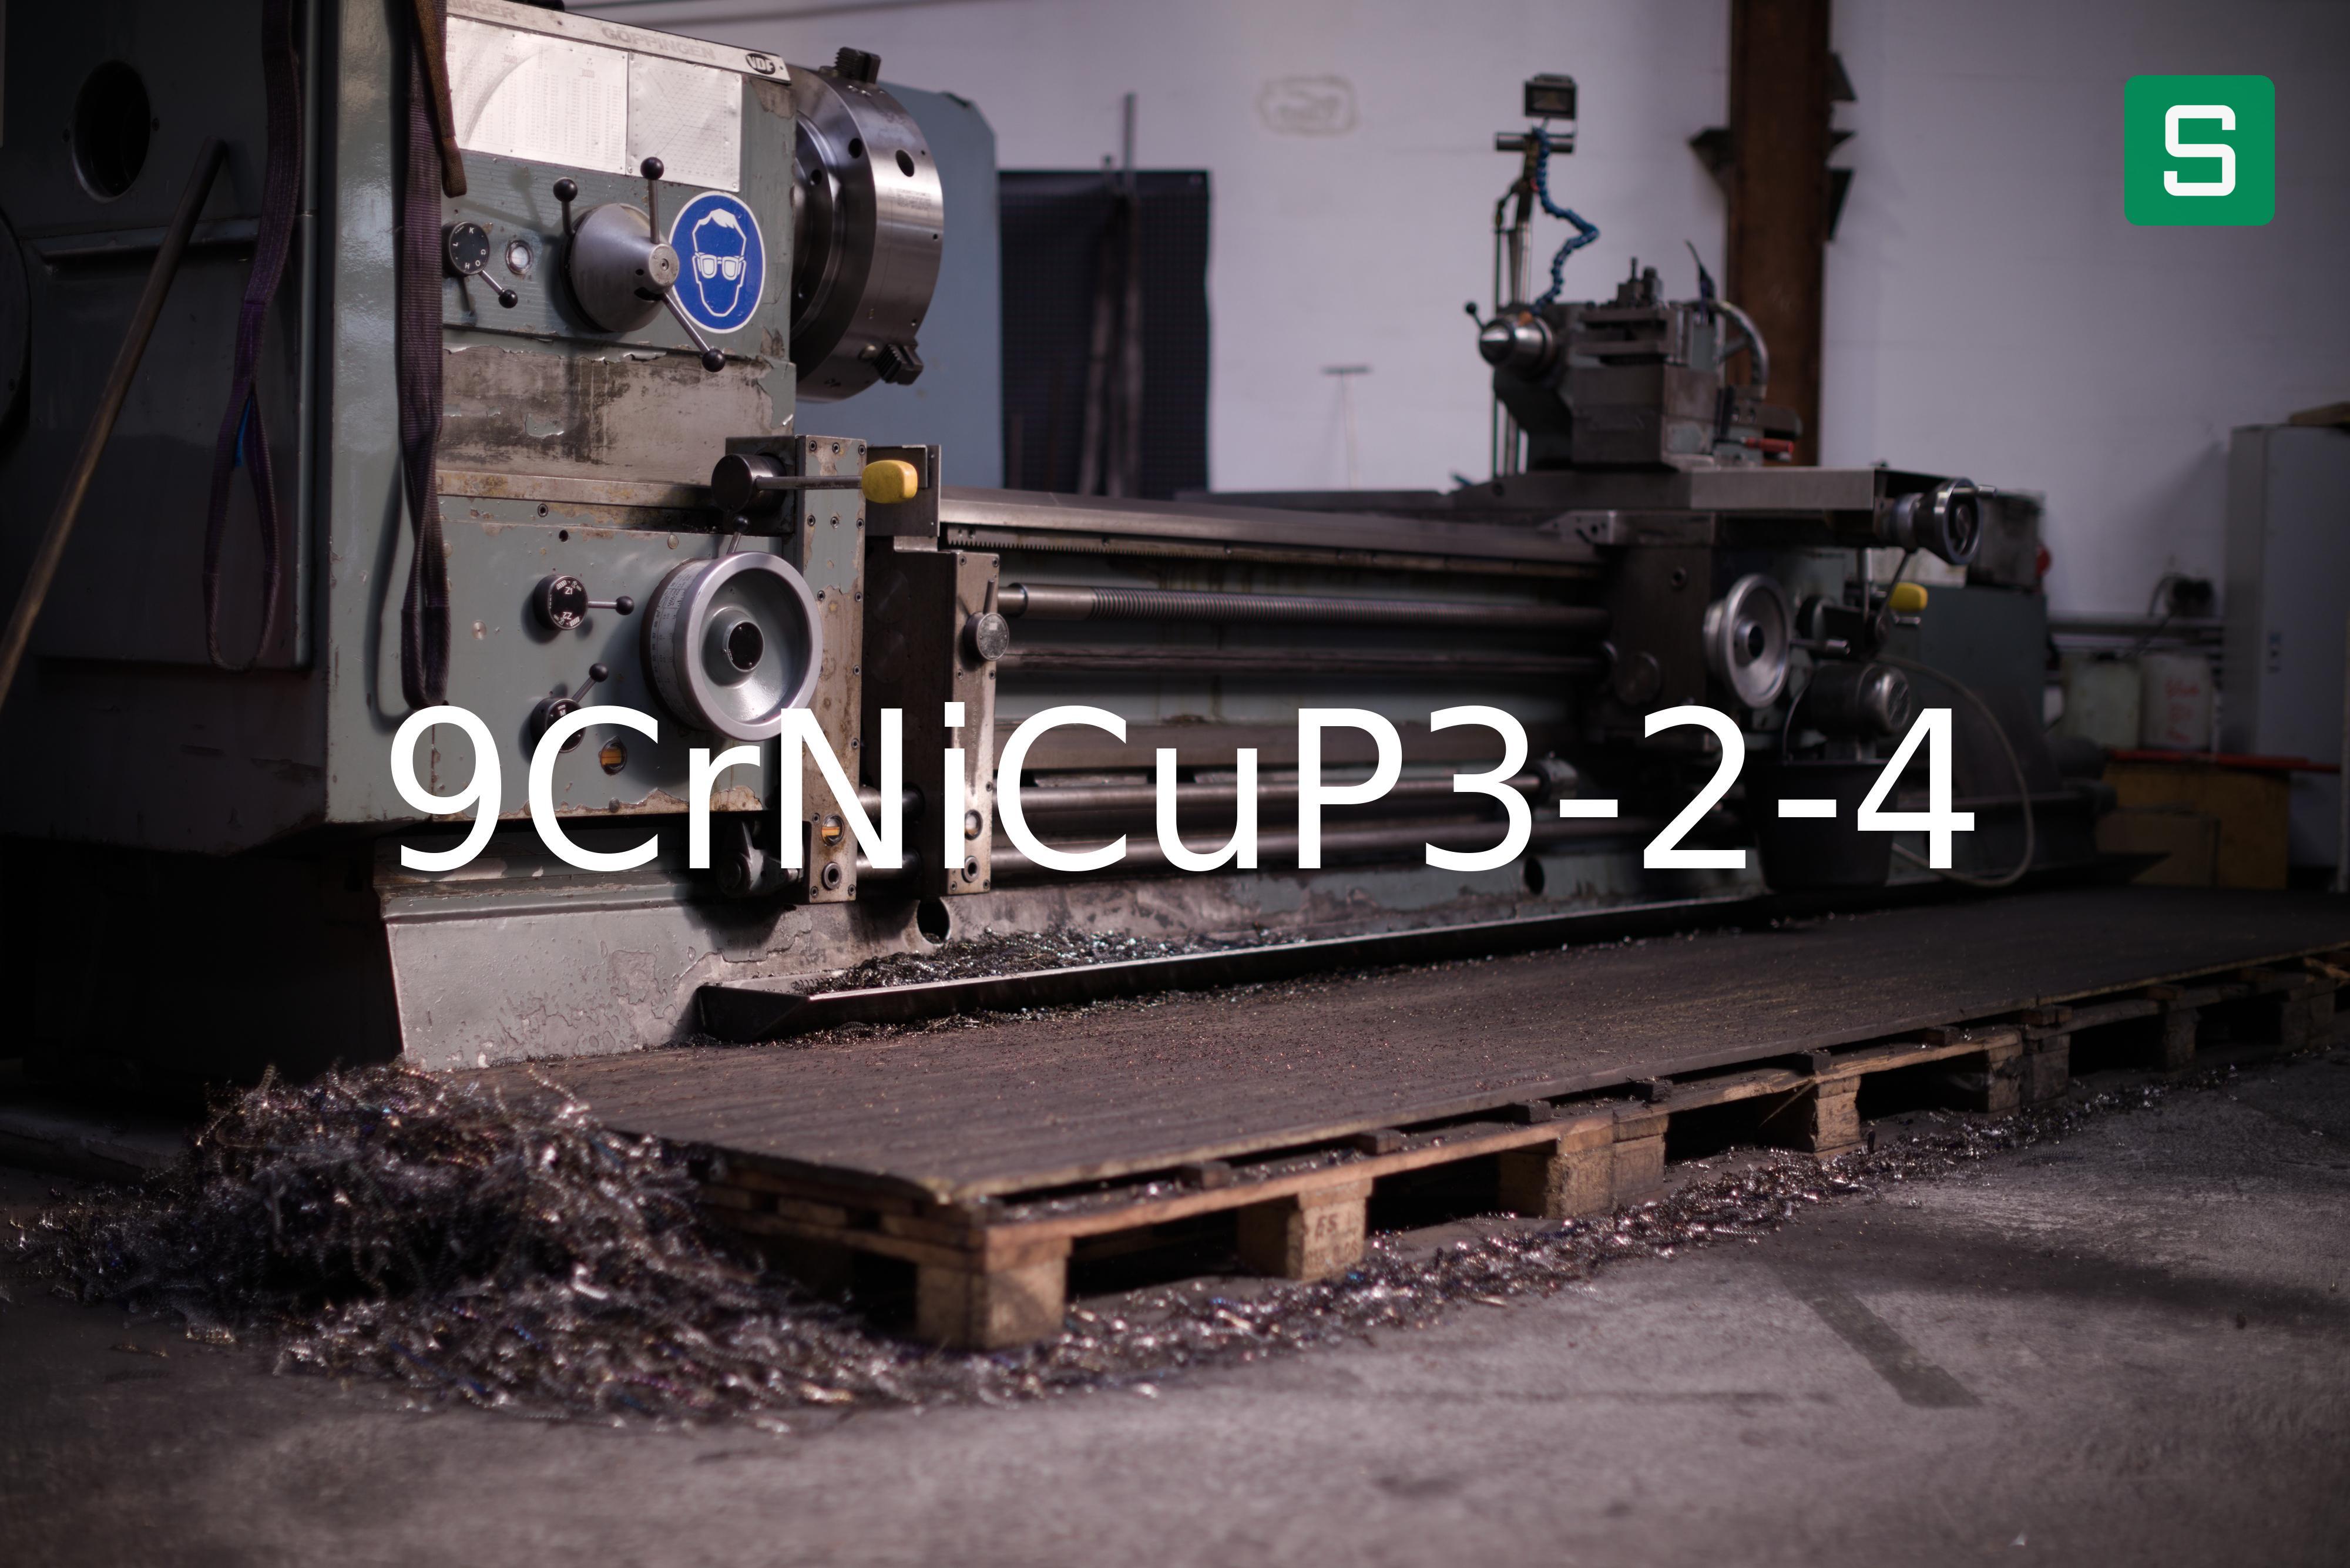 Steel Material: 9CrNiCuP3-2-4